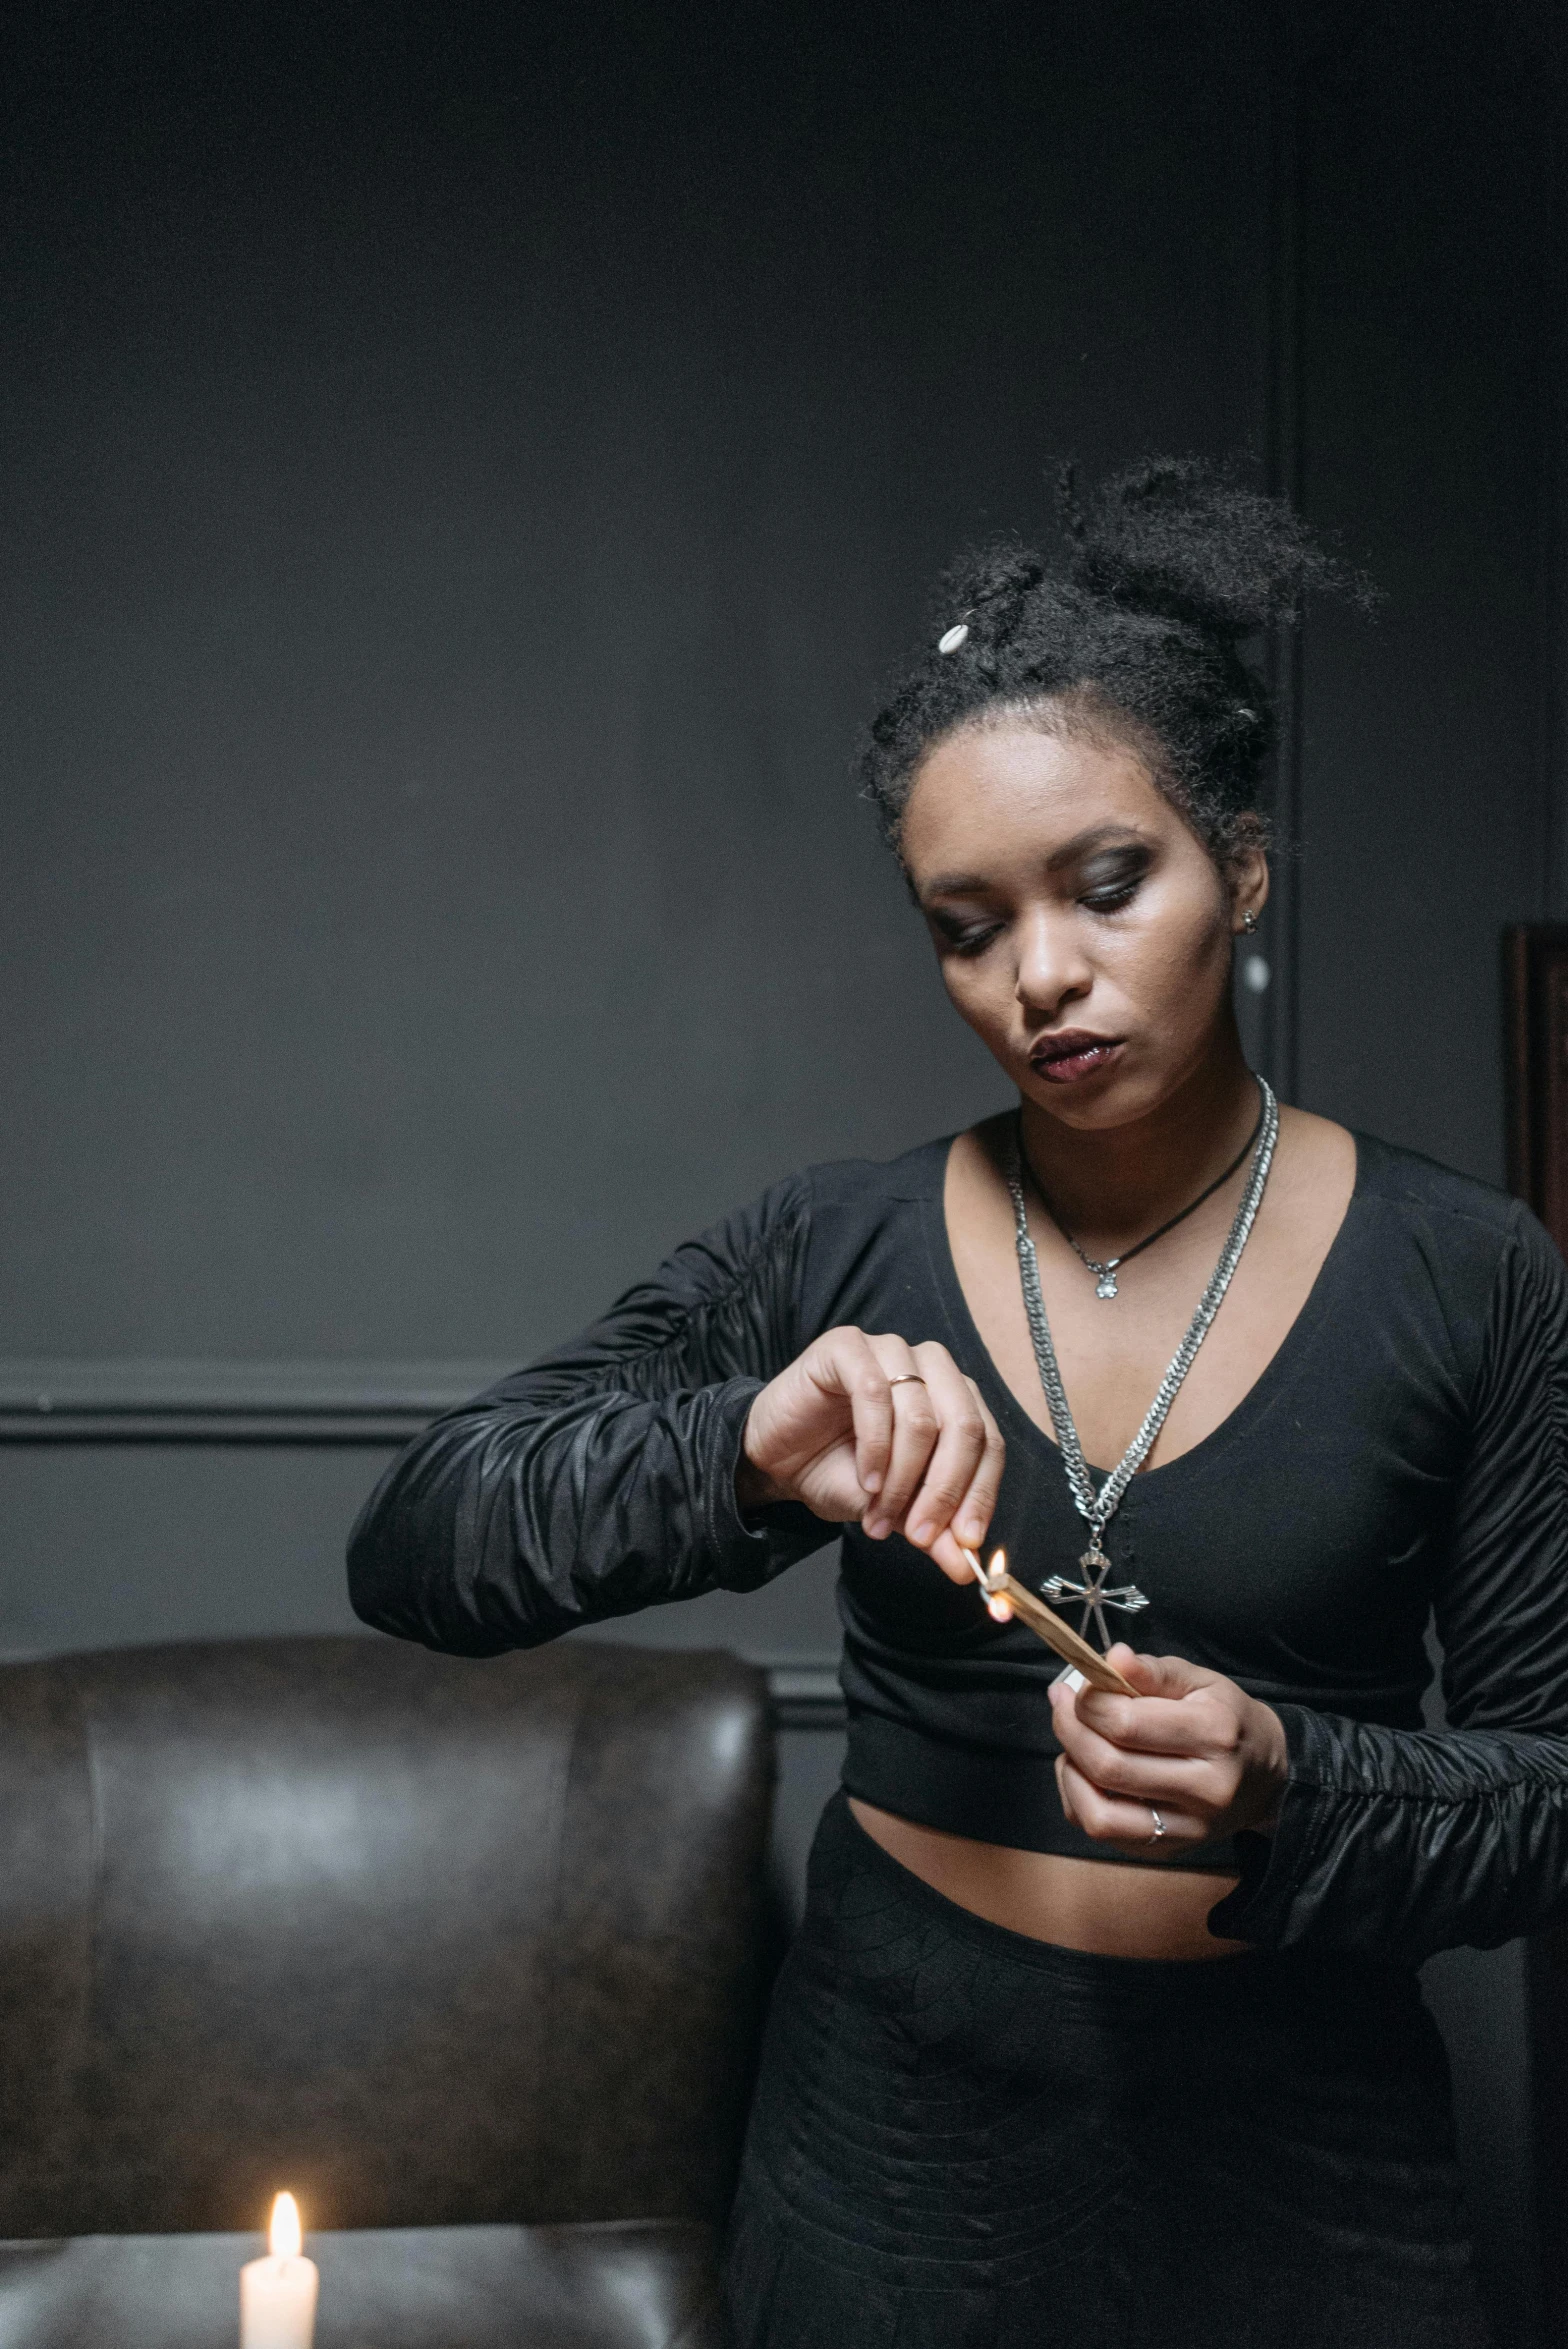 a woman lighting a candle in a dark room, an album cover, unsplash, leather jewelry, tessa thompson inspired, holding syringe, sitting on vintage leather sofa